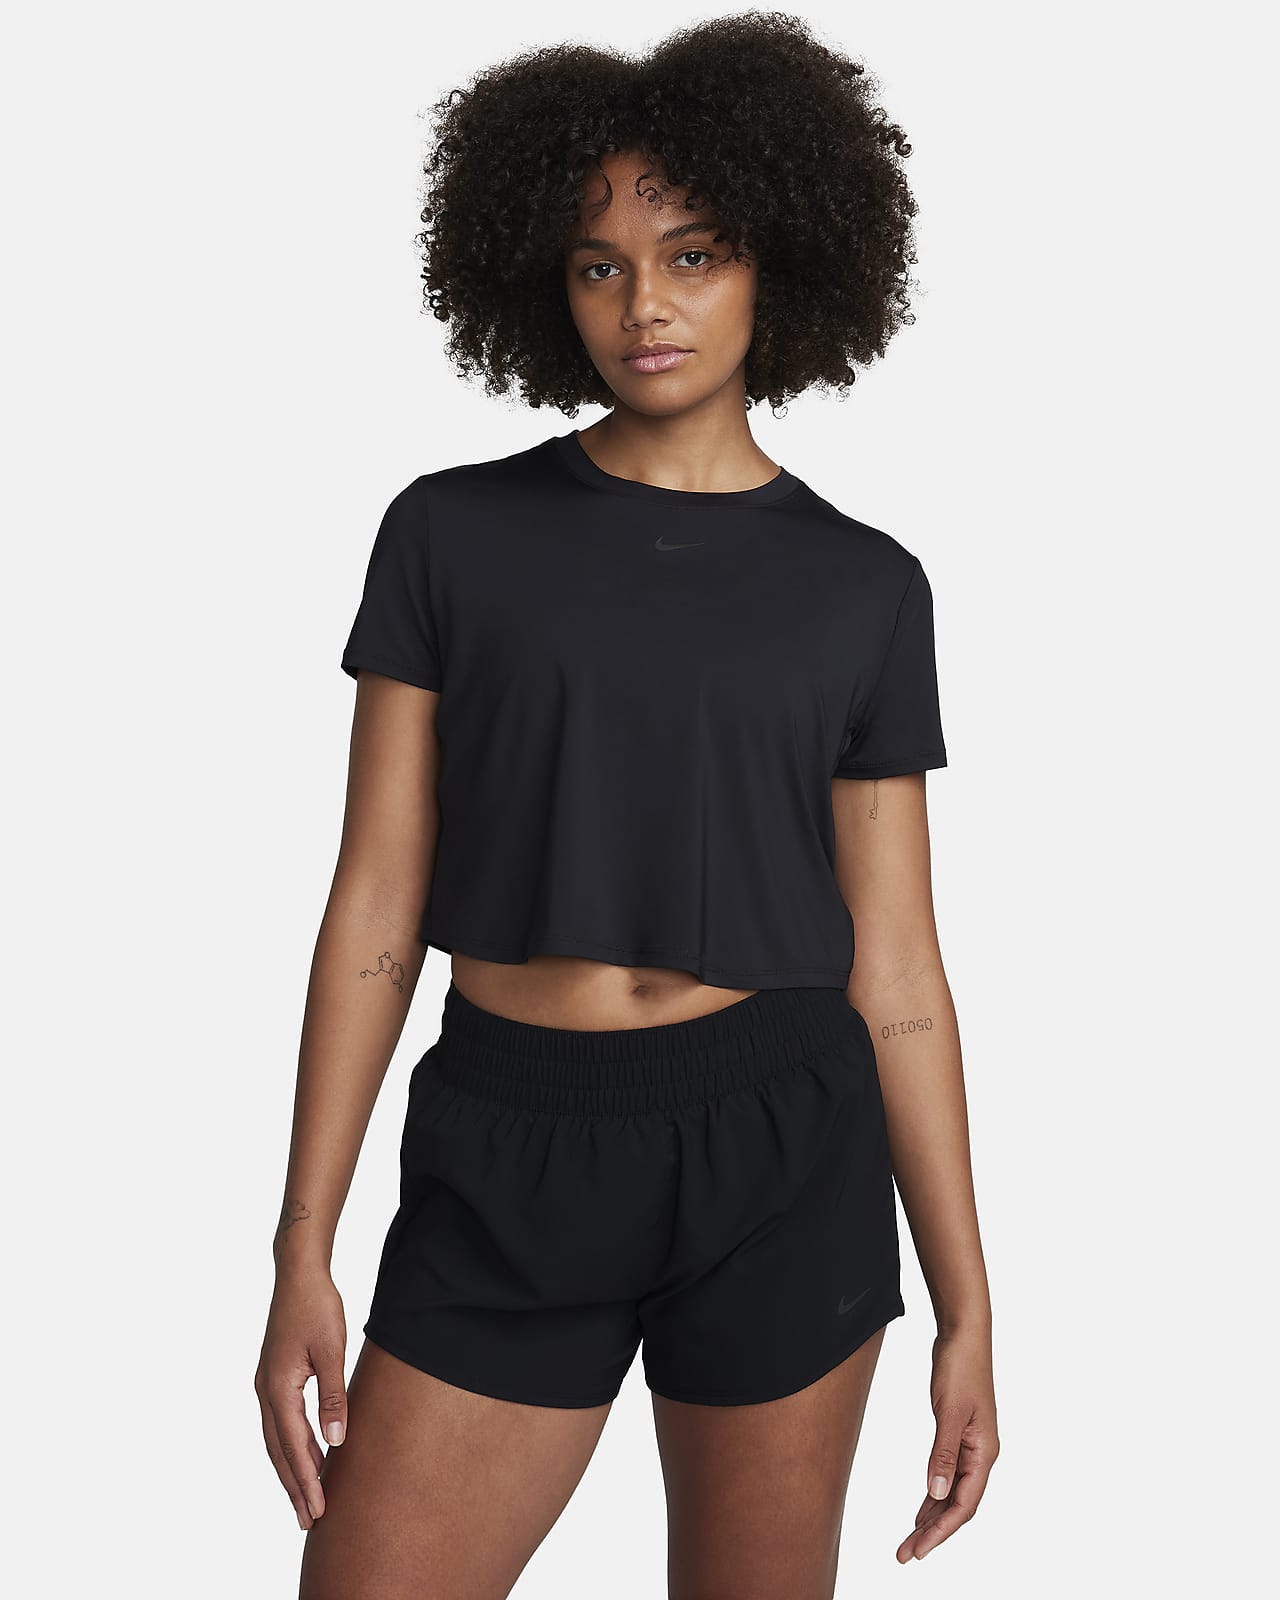 Nike One Classic Women's Dri-FIT Short-Sleeve Cropped Top